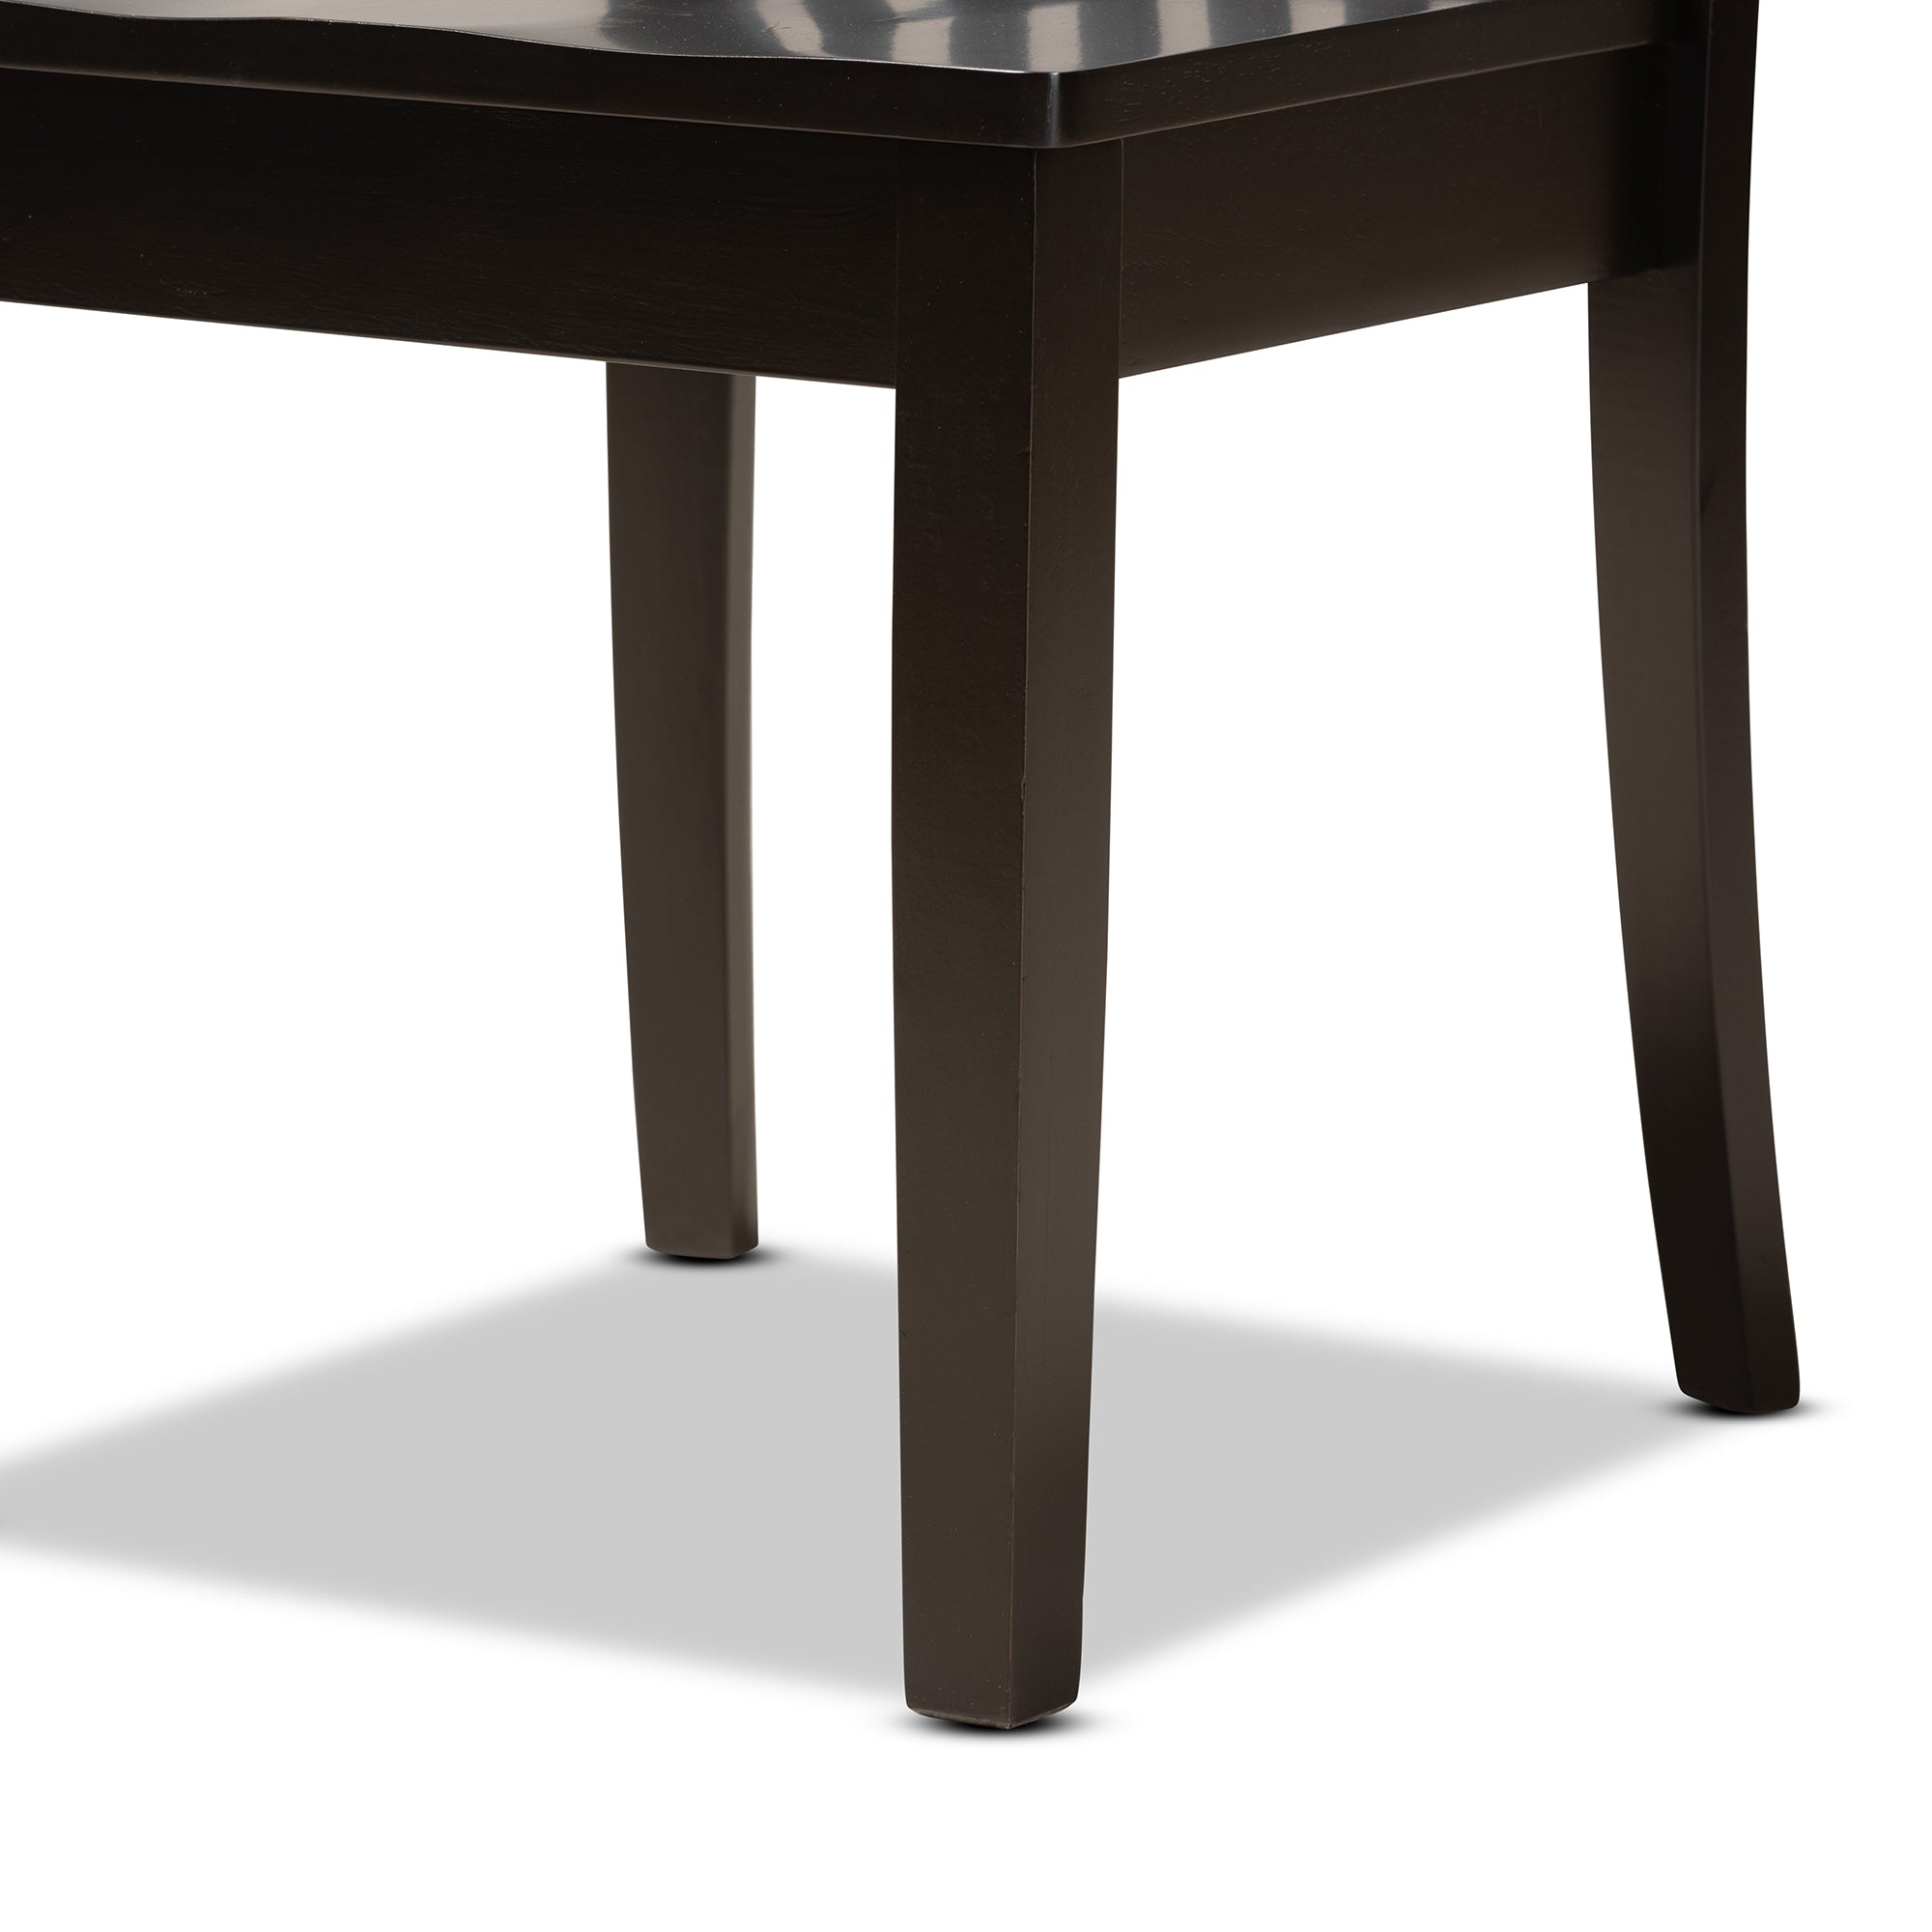 Zora Modern Dining Table & Dining Chairs 5-Piece-Dining Set-Baxton Studio - WI-Wall2Wall Furnishings